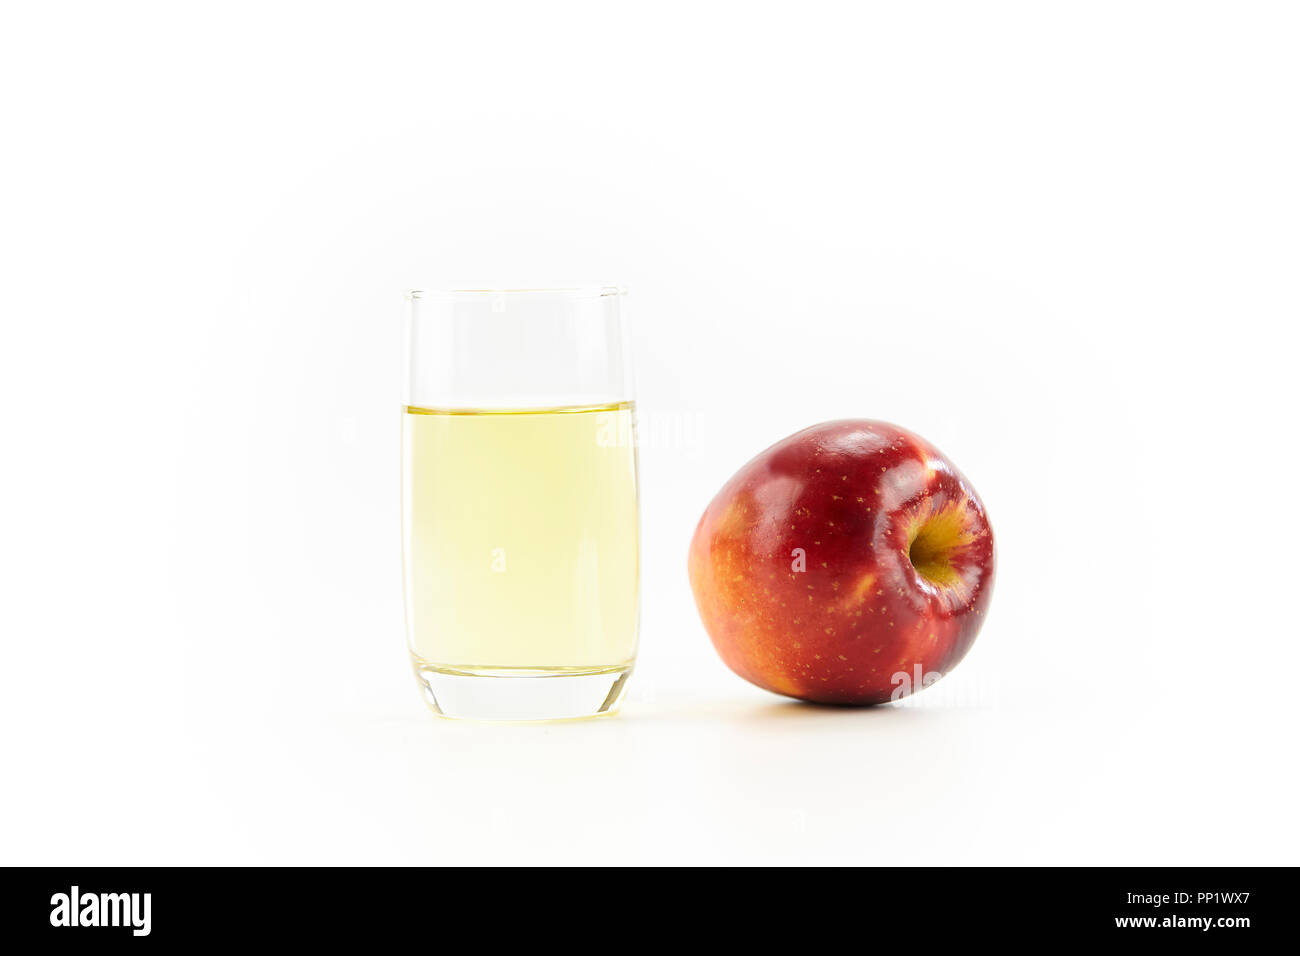 apple and a glass of apple juice isolated on white background. Stock Photo